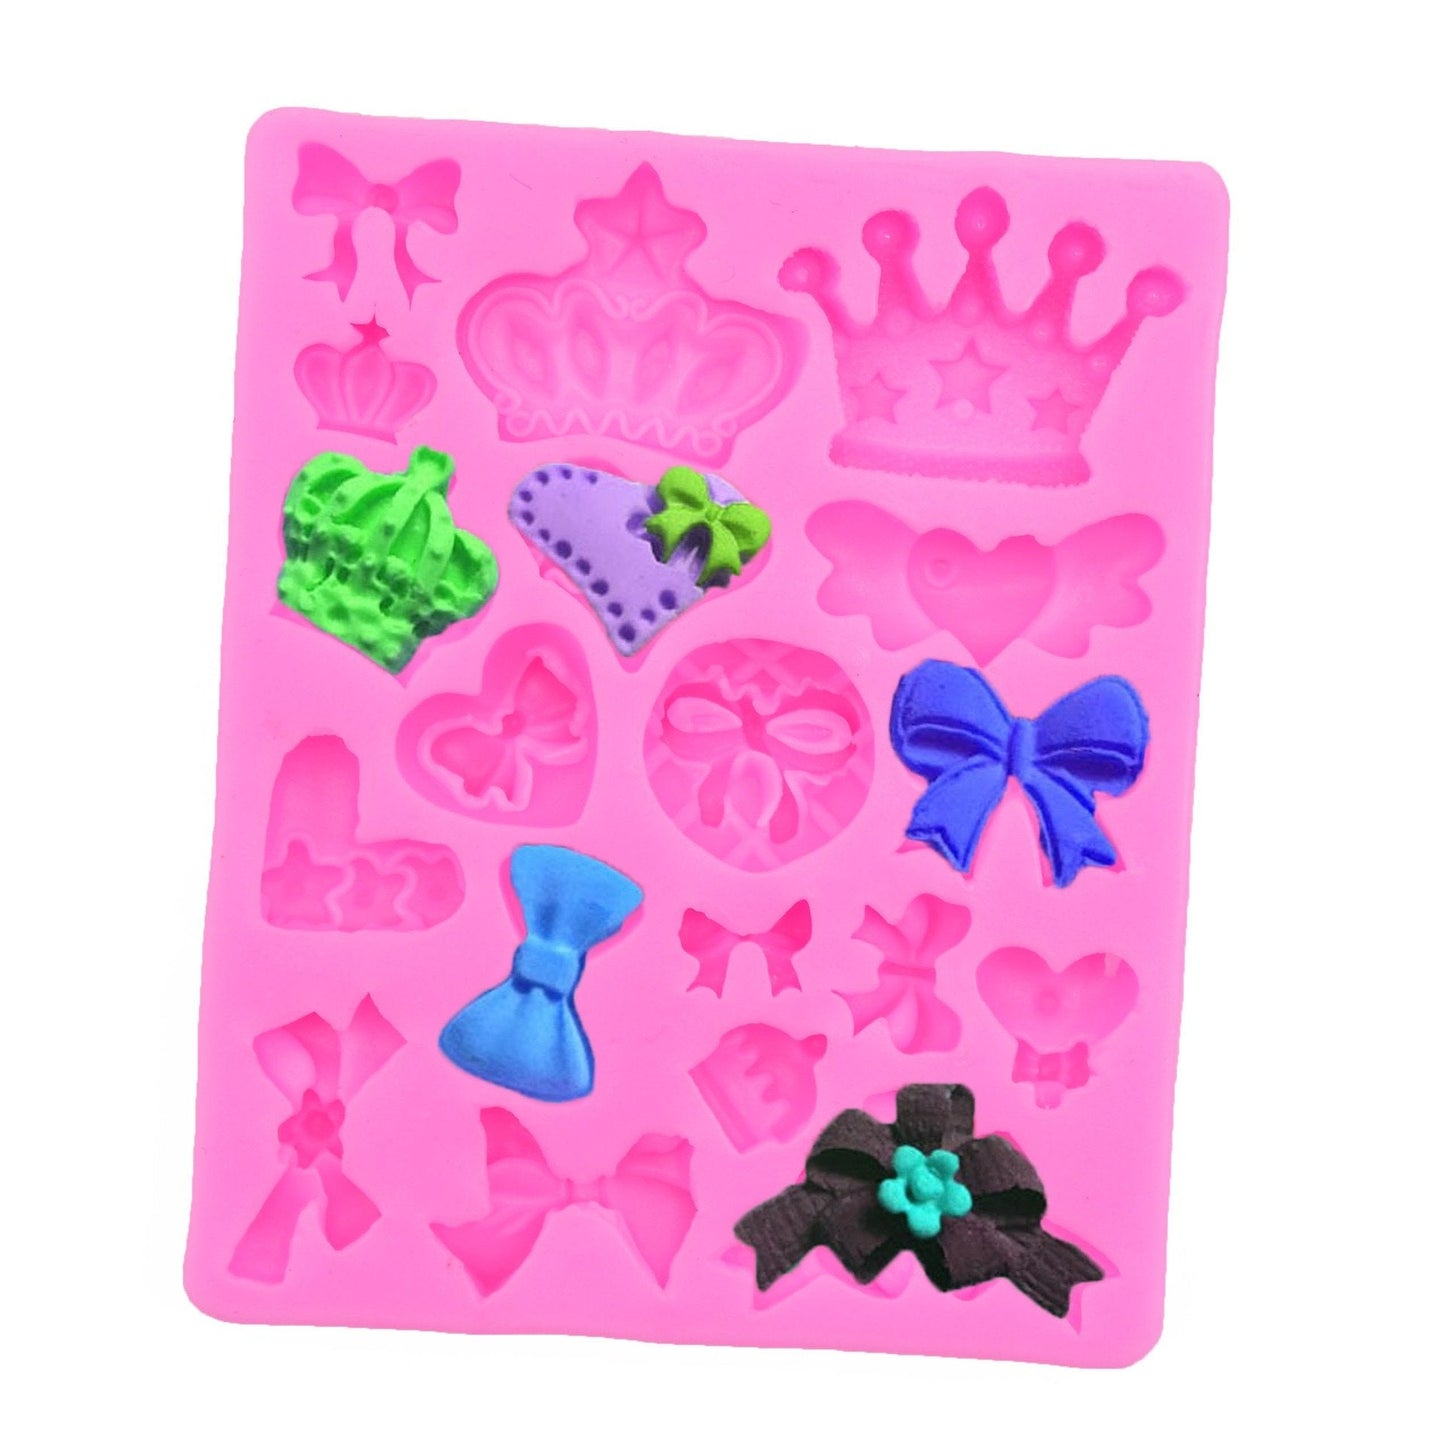 Crown, Bow & Heart Silicone Fondant & Chocolate Mold